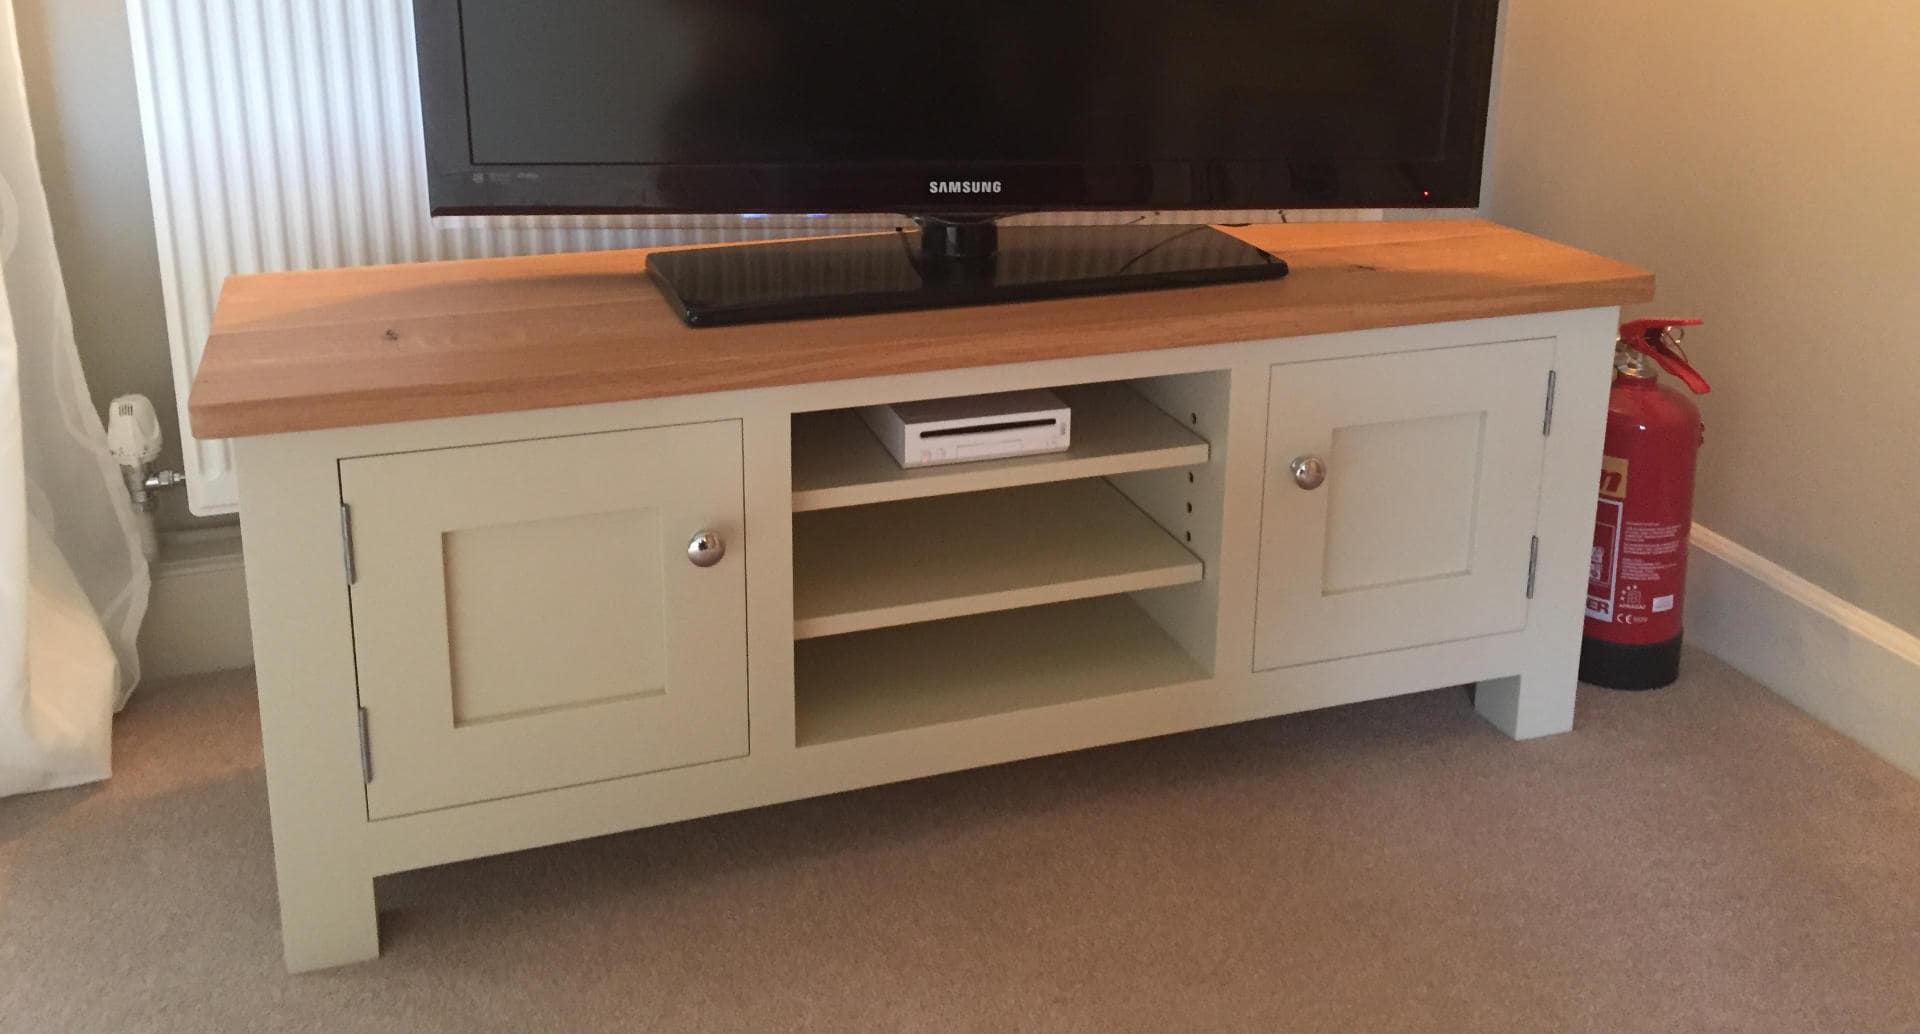 A TV place upon a bespoke, wooden, TV stand